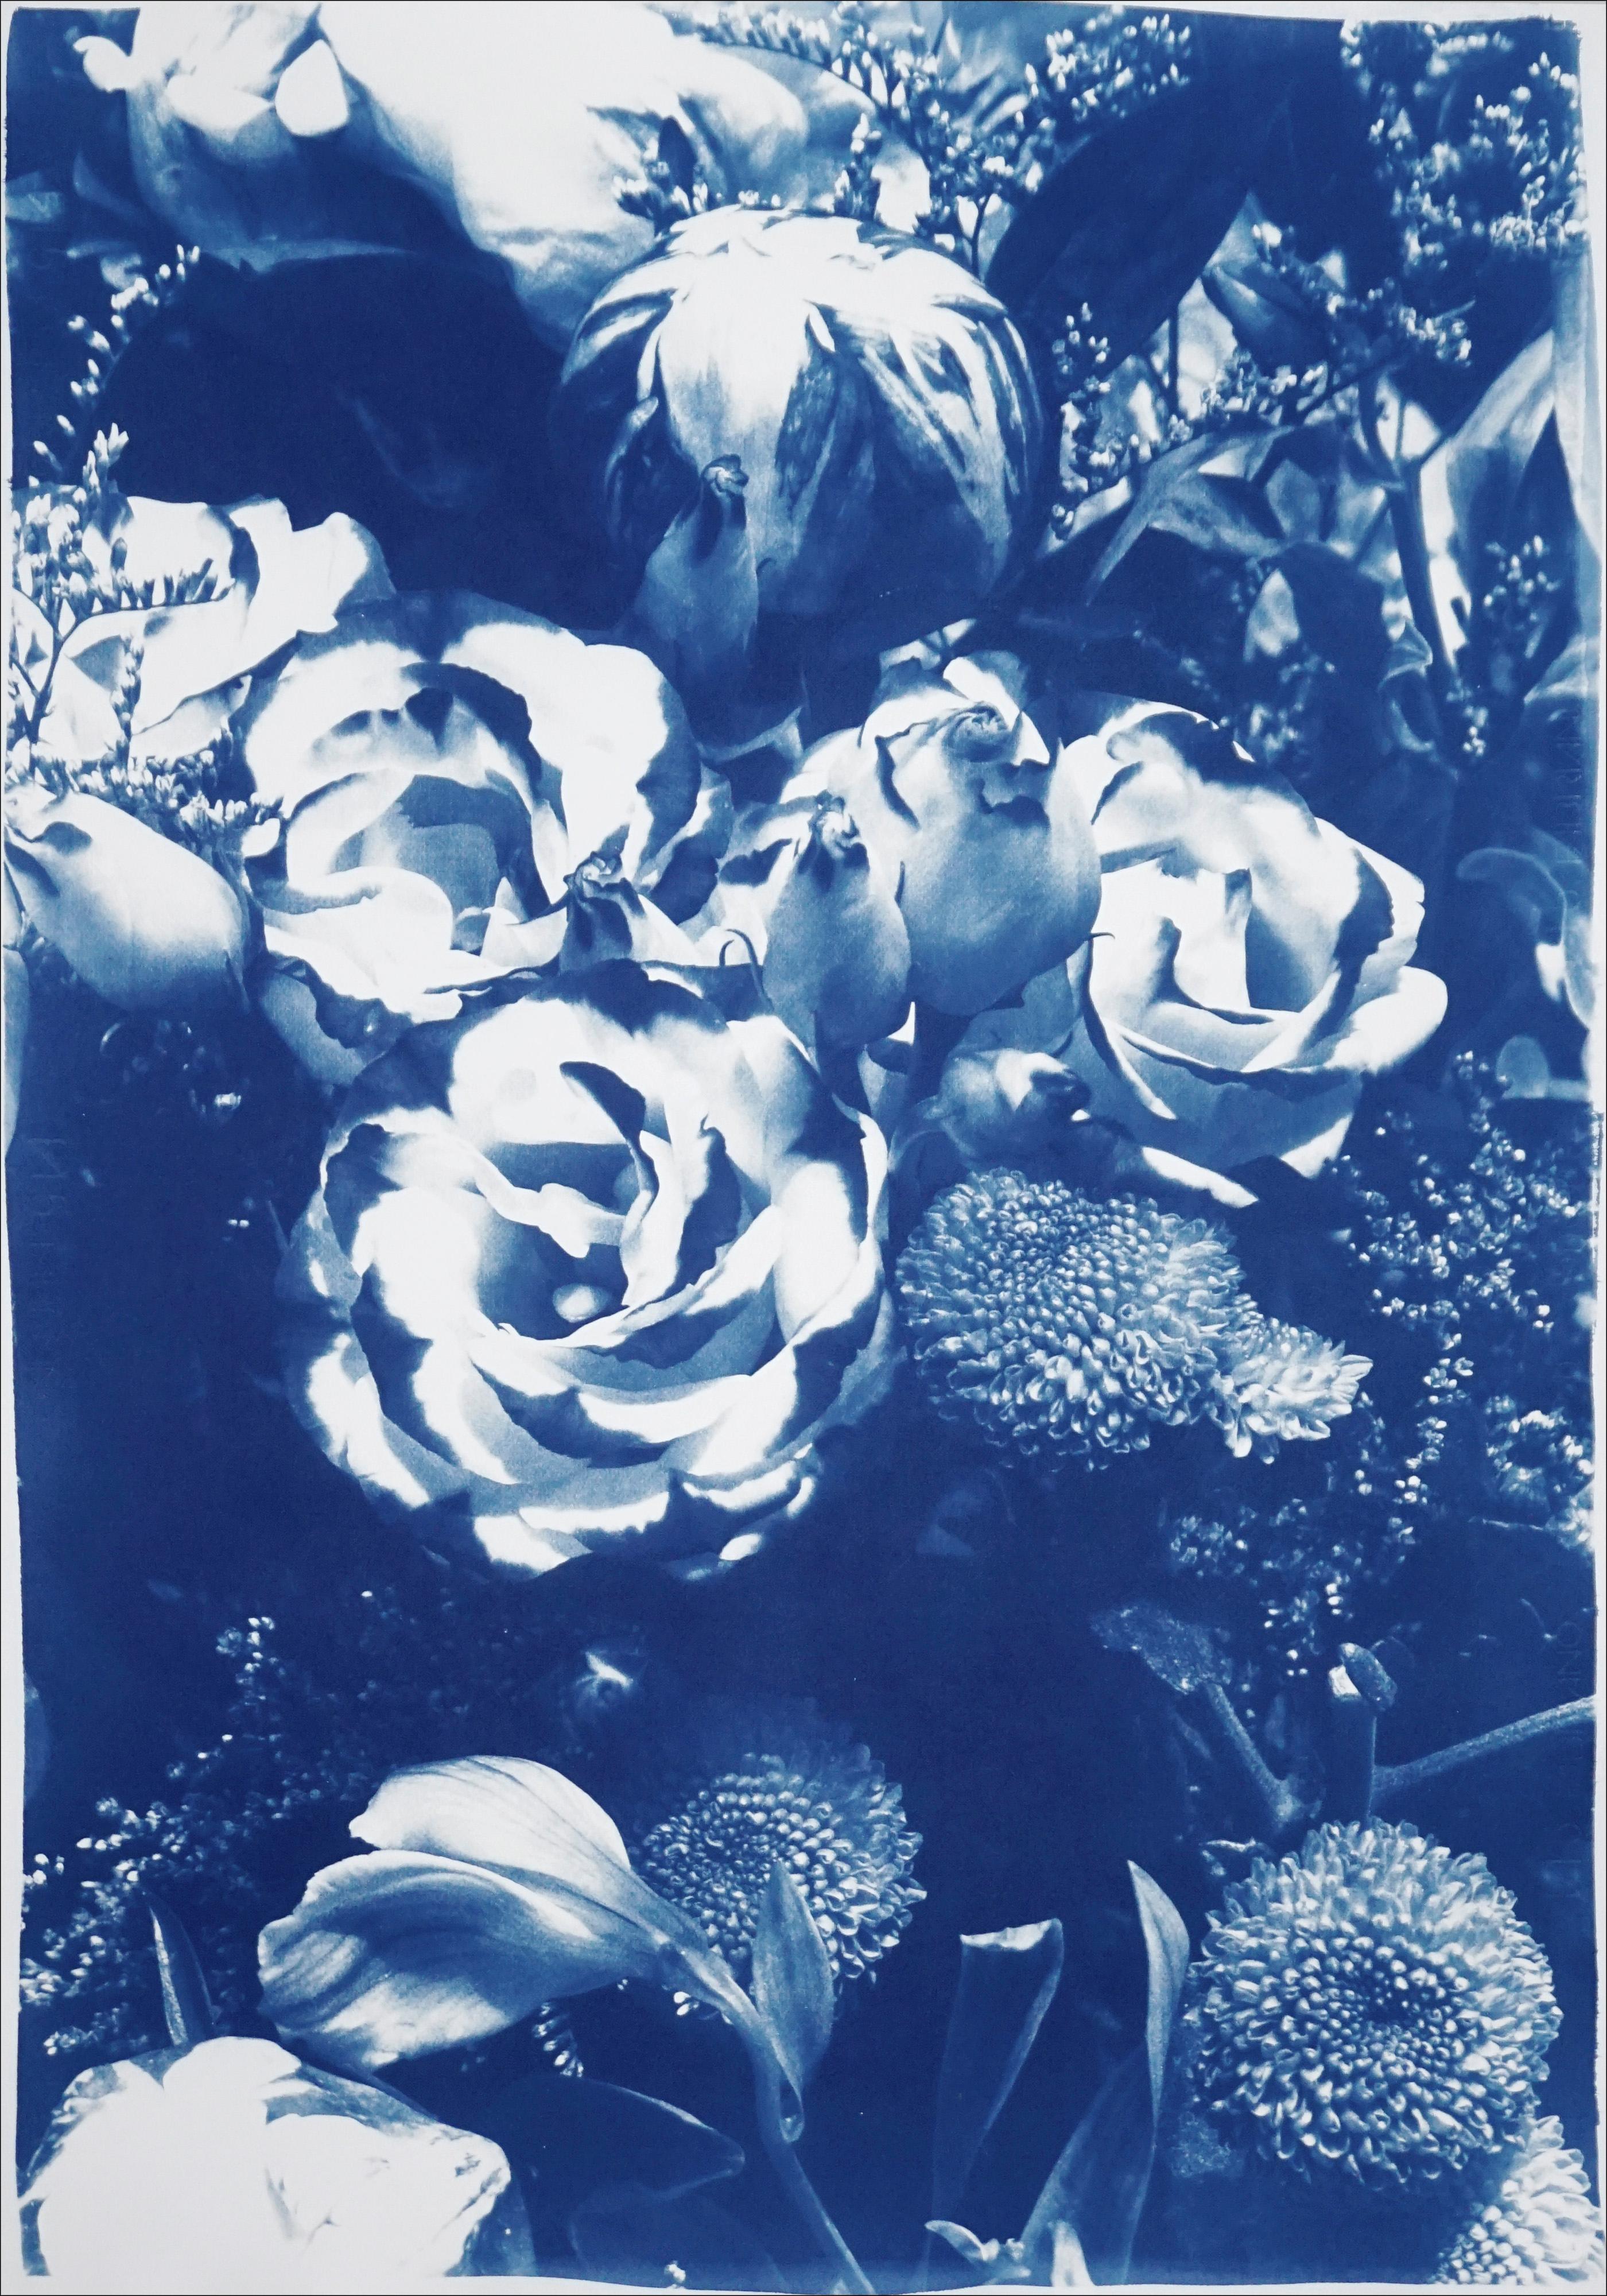 Kind of Cyan Still-Life - Botanical Cyanotype of Blue Flower Bouquet, Natural Roses on Watercolor Paper